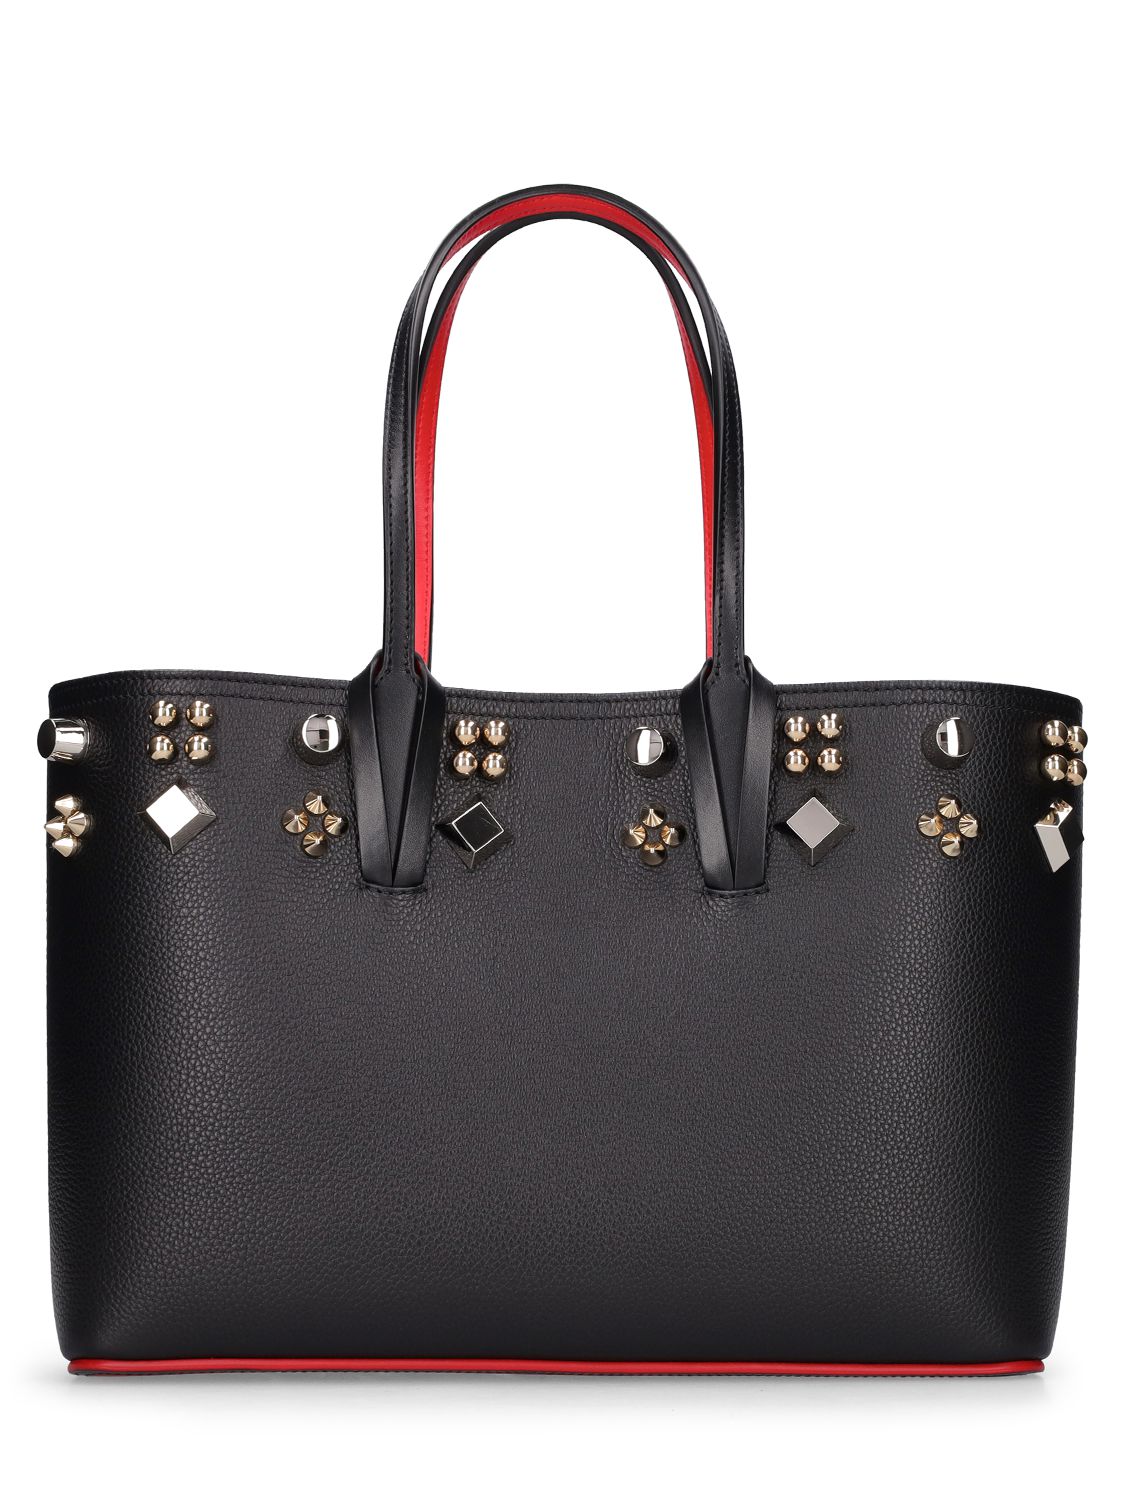 Small Cabata Spiked Leather Tote Bag